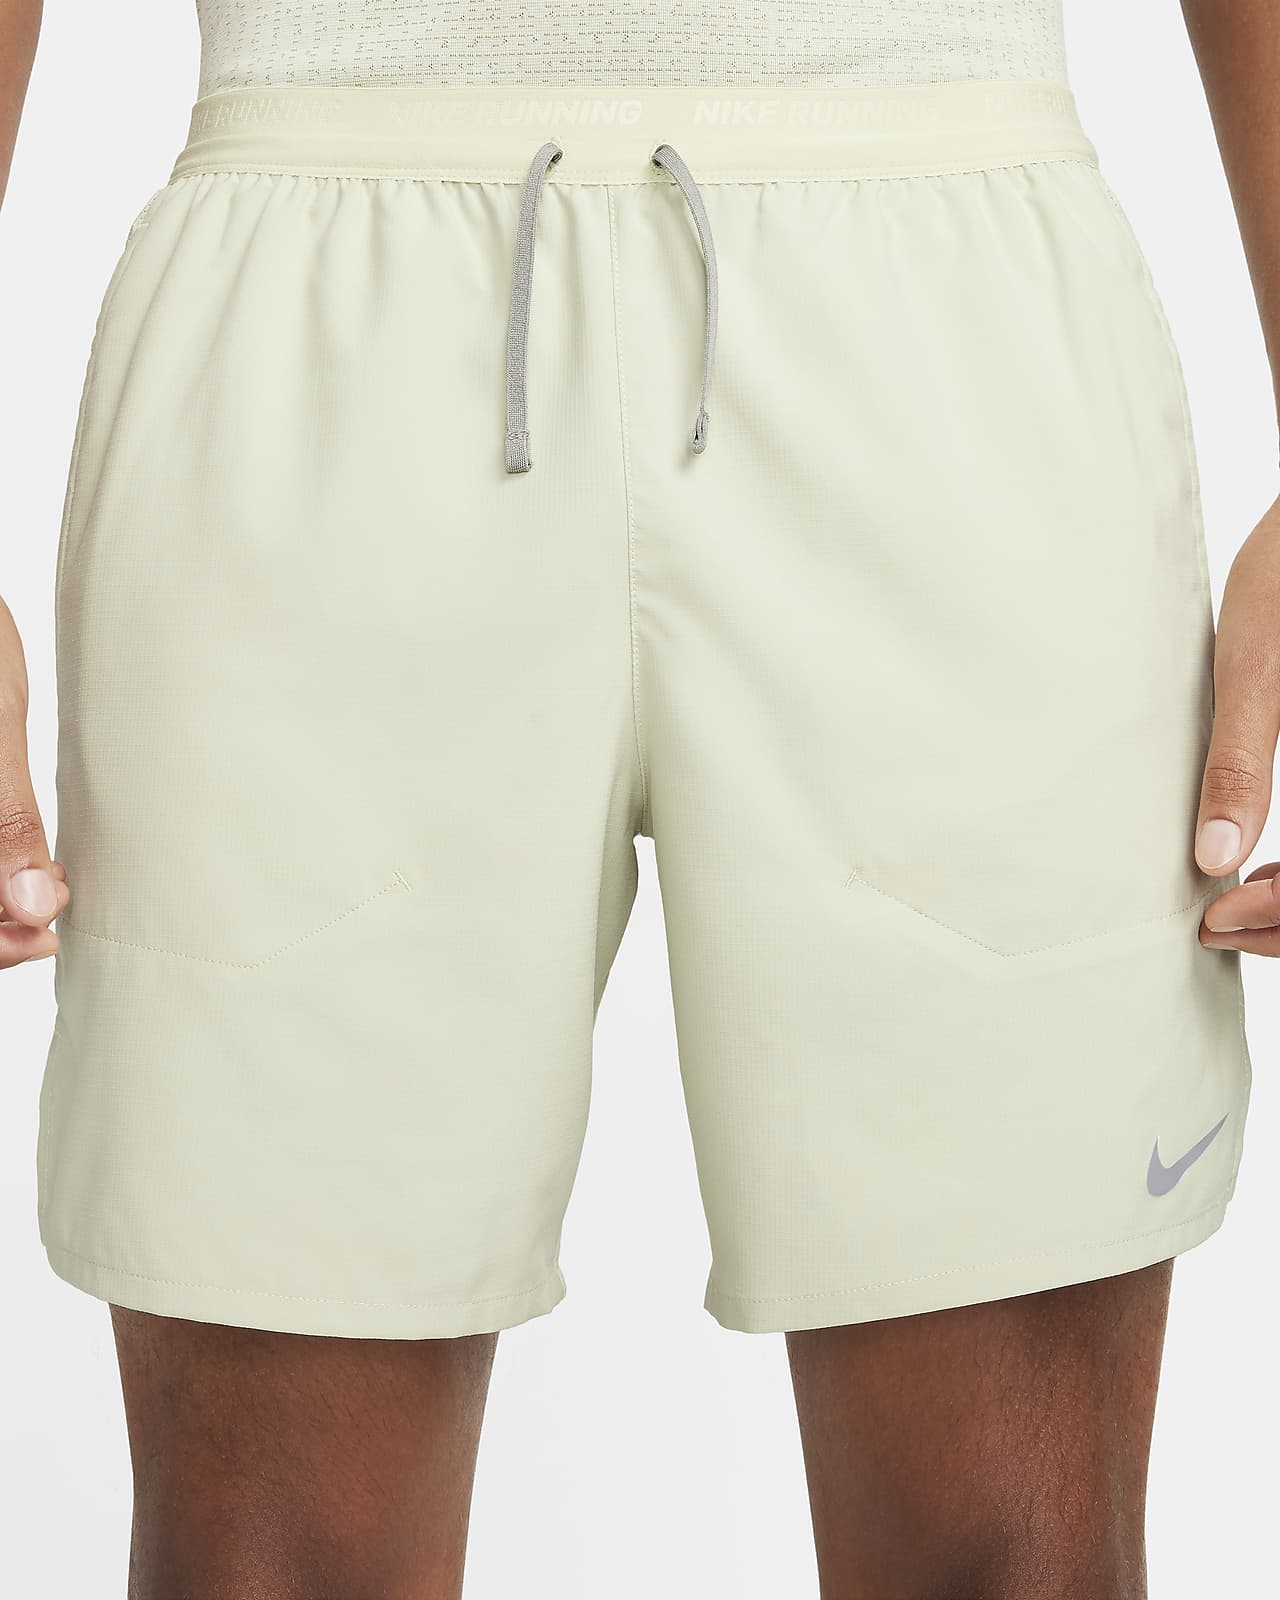 Shorts With Inner Tights Men - Best Price in Singapore - Jan 2024